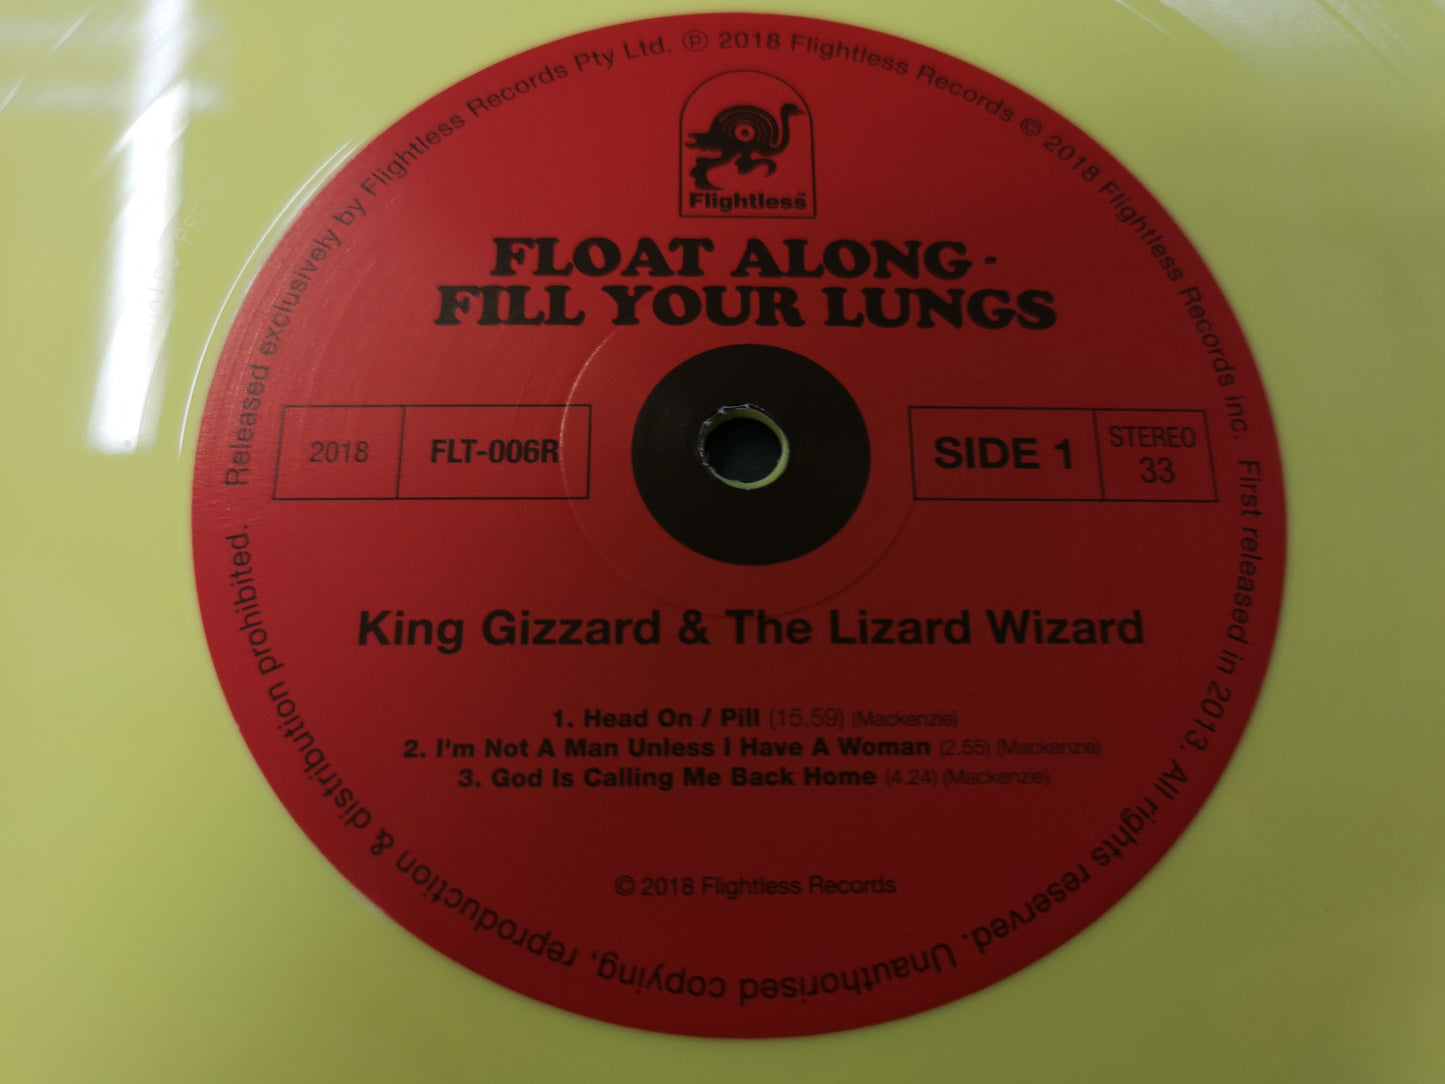 King Gizzard and the Lizard Wizard "Float Along - Fill Your Lungs" RE MINT Yellow Vinyl 2018